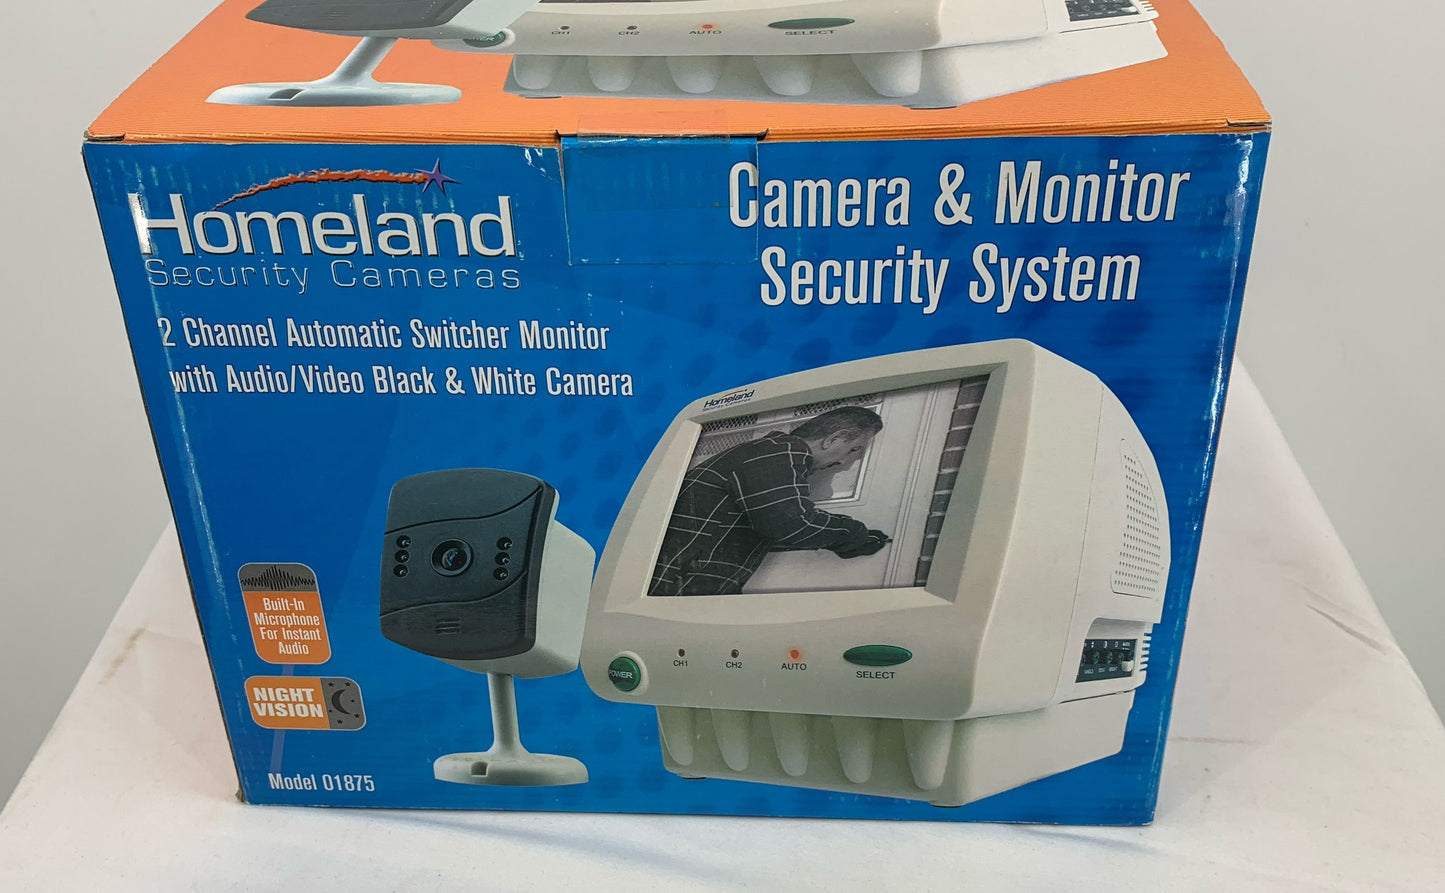 New Homeland Camera & Monitor Security System 2 Channel Audio/Video Model 01875